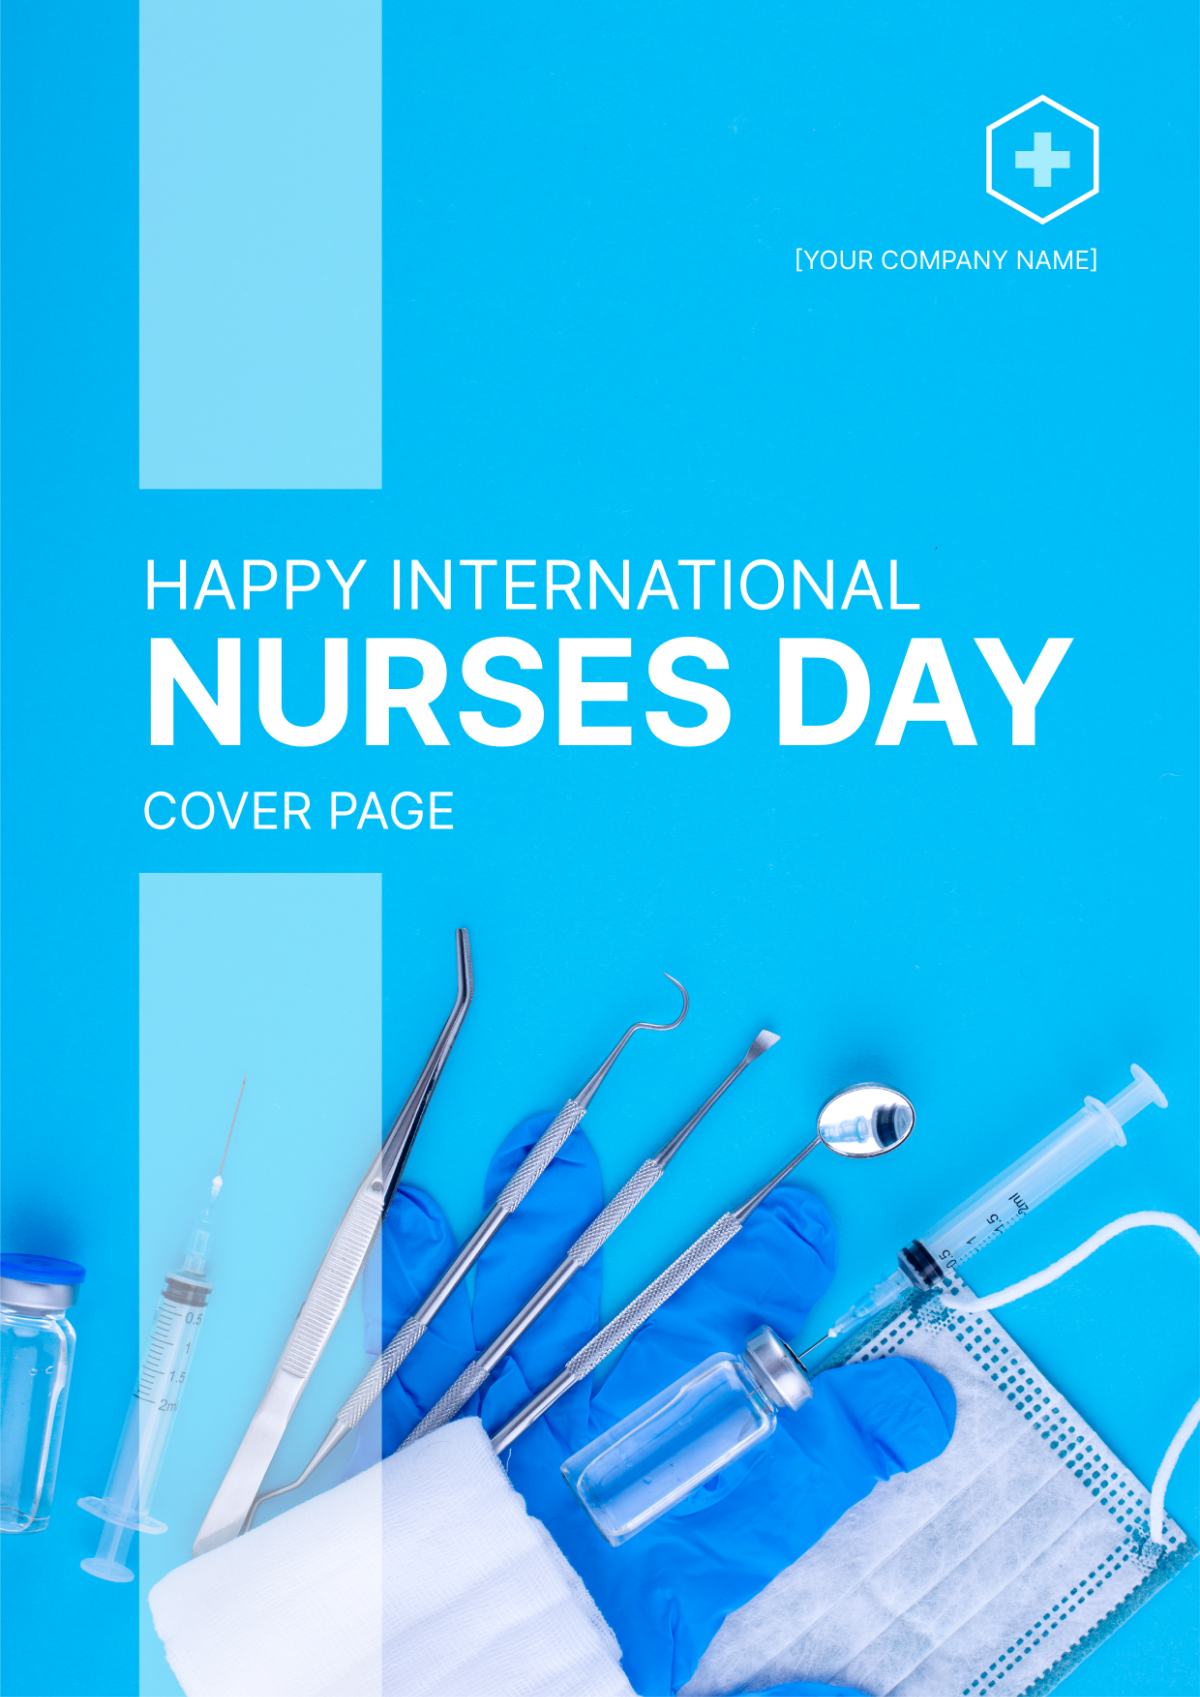 Happy International Nurses Day Cover Page